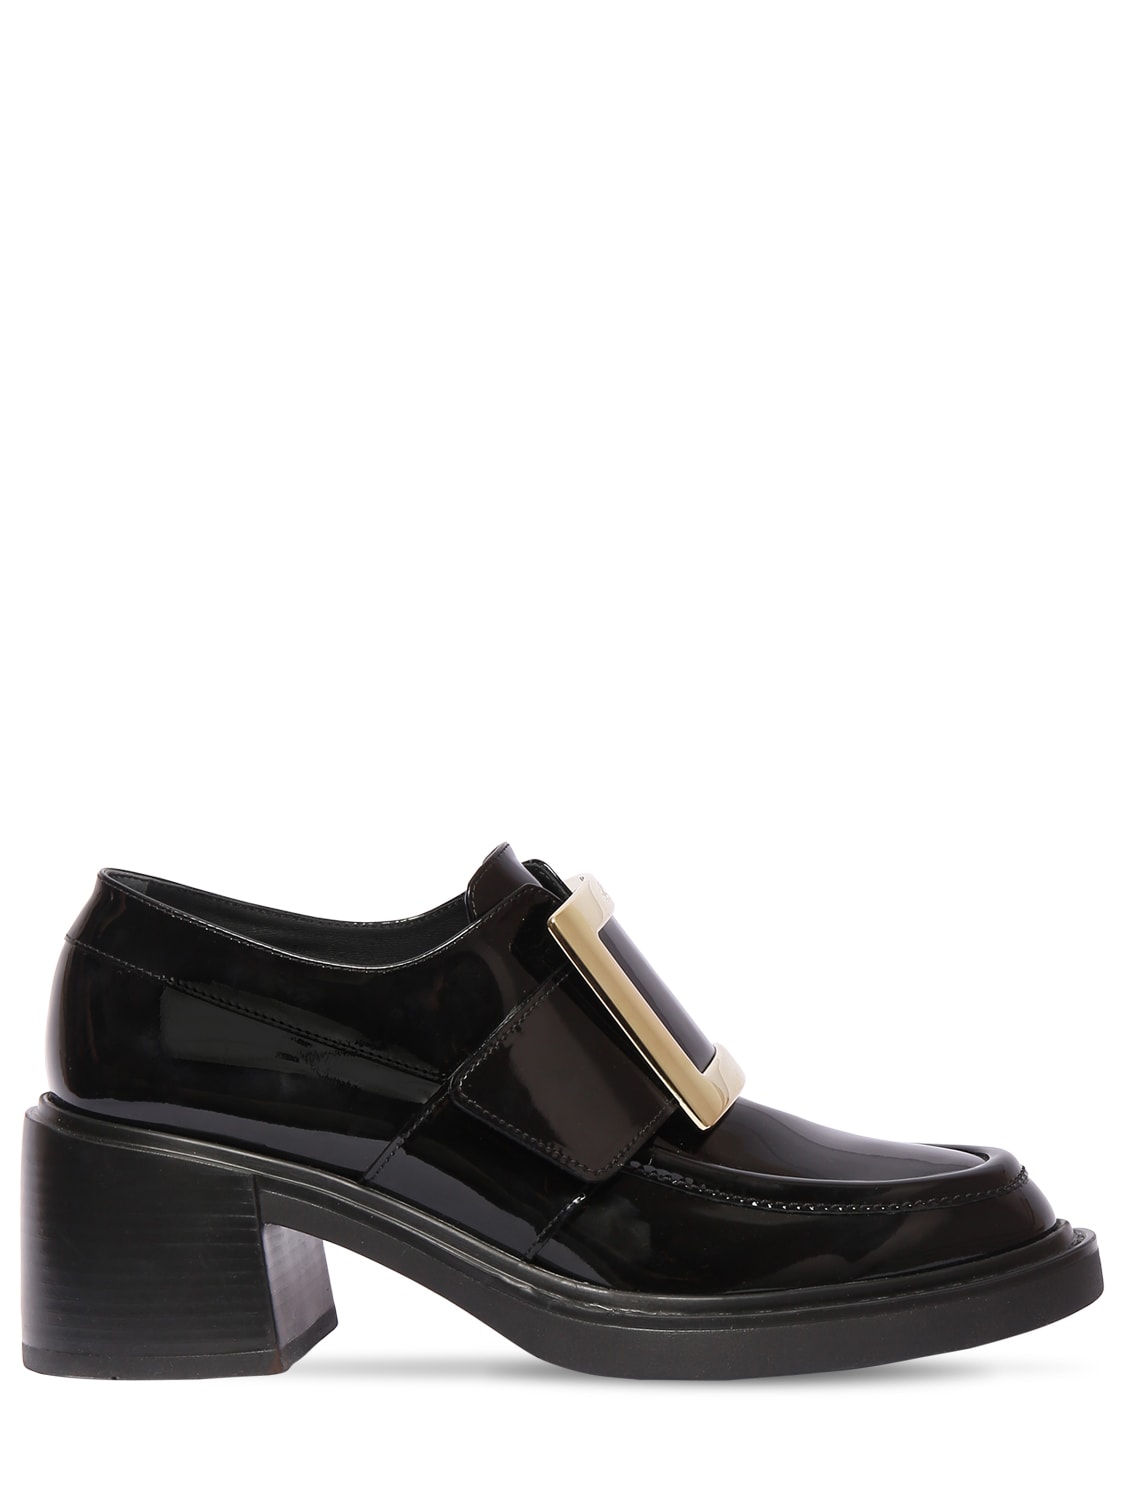 Image of 60mm Viv Rangers Patent Leather Loafers